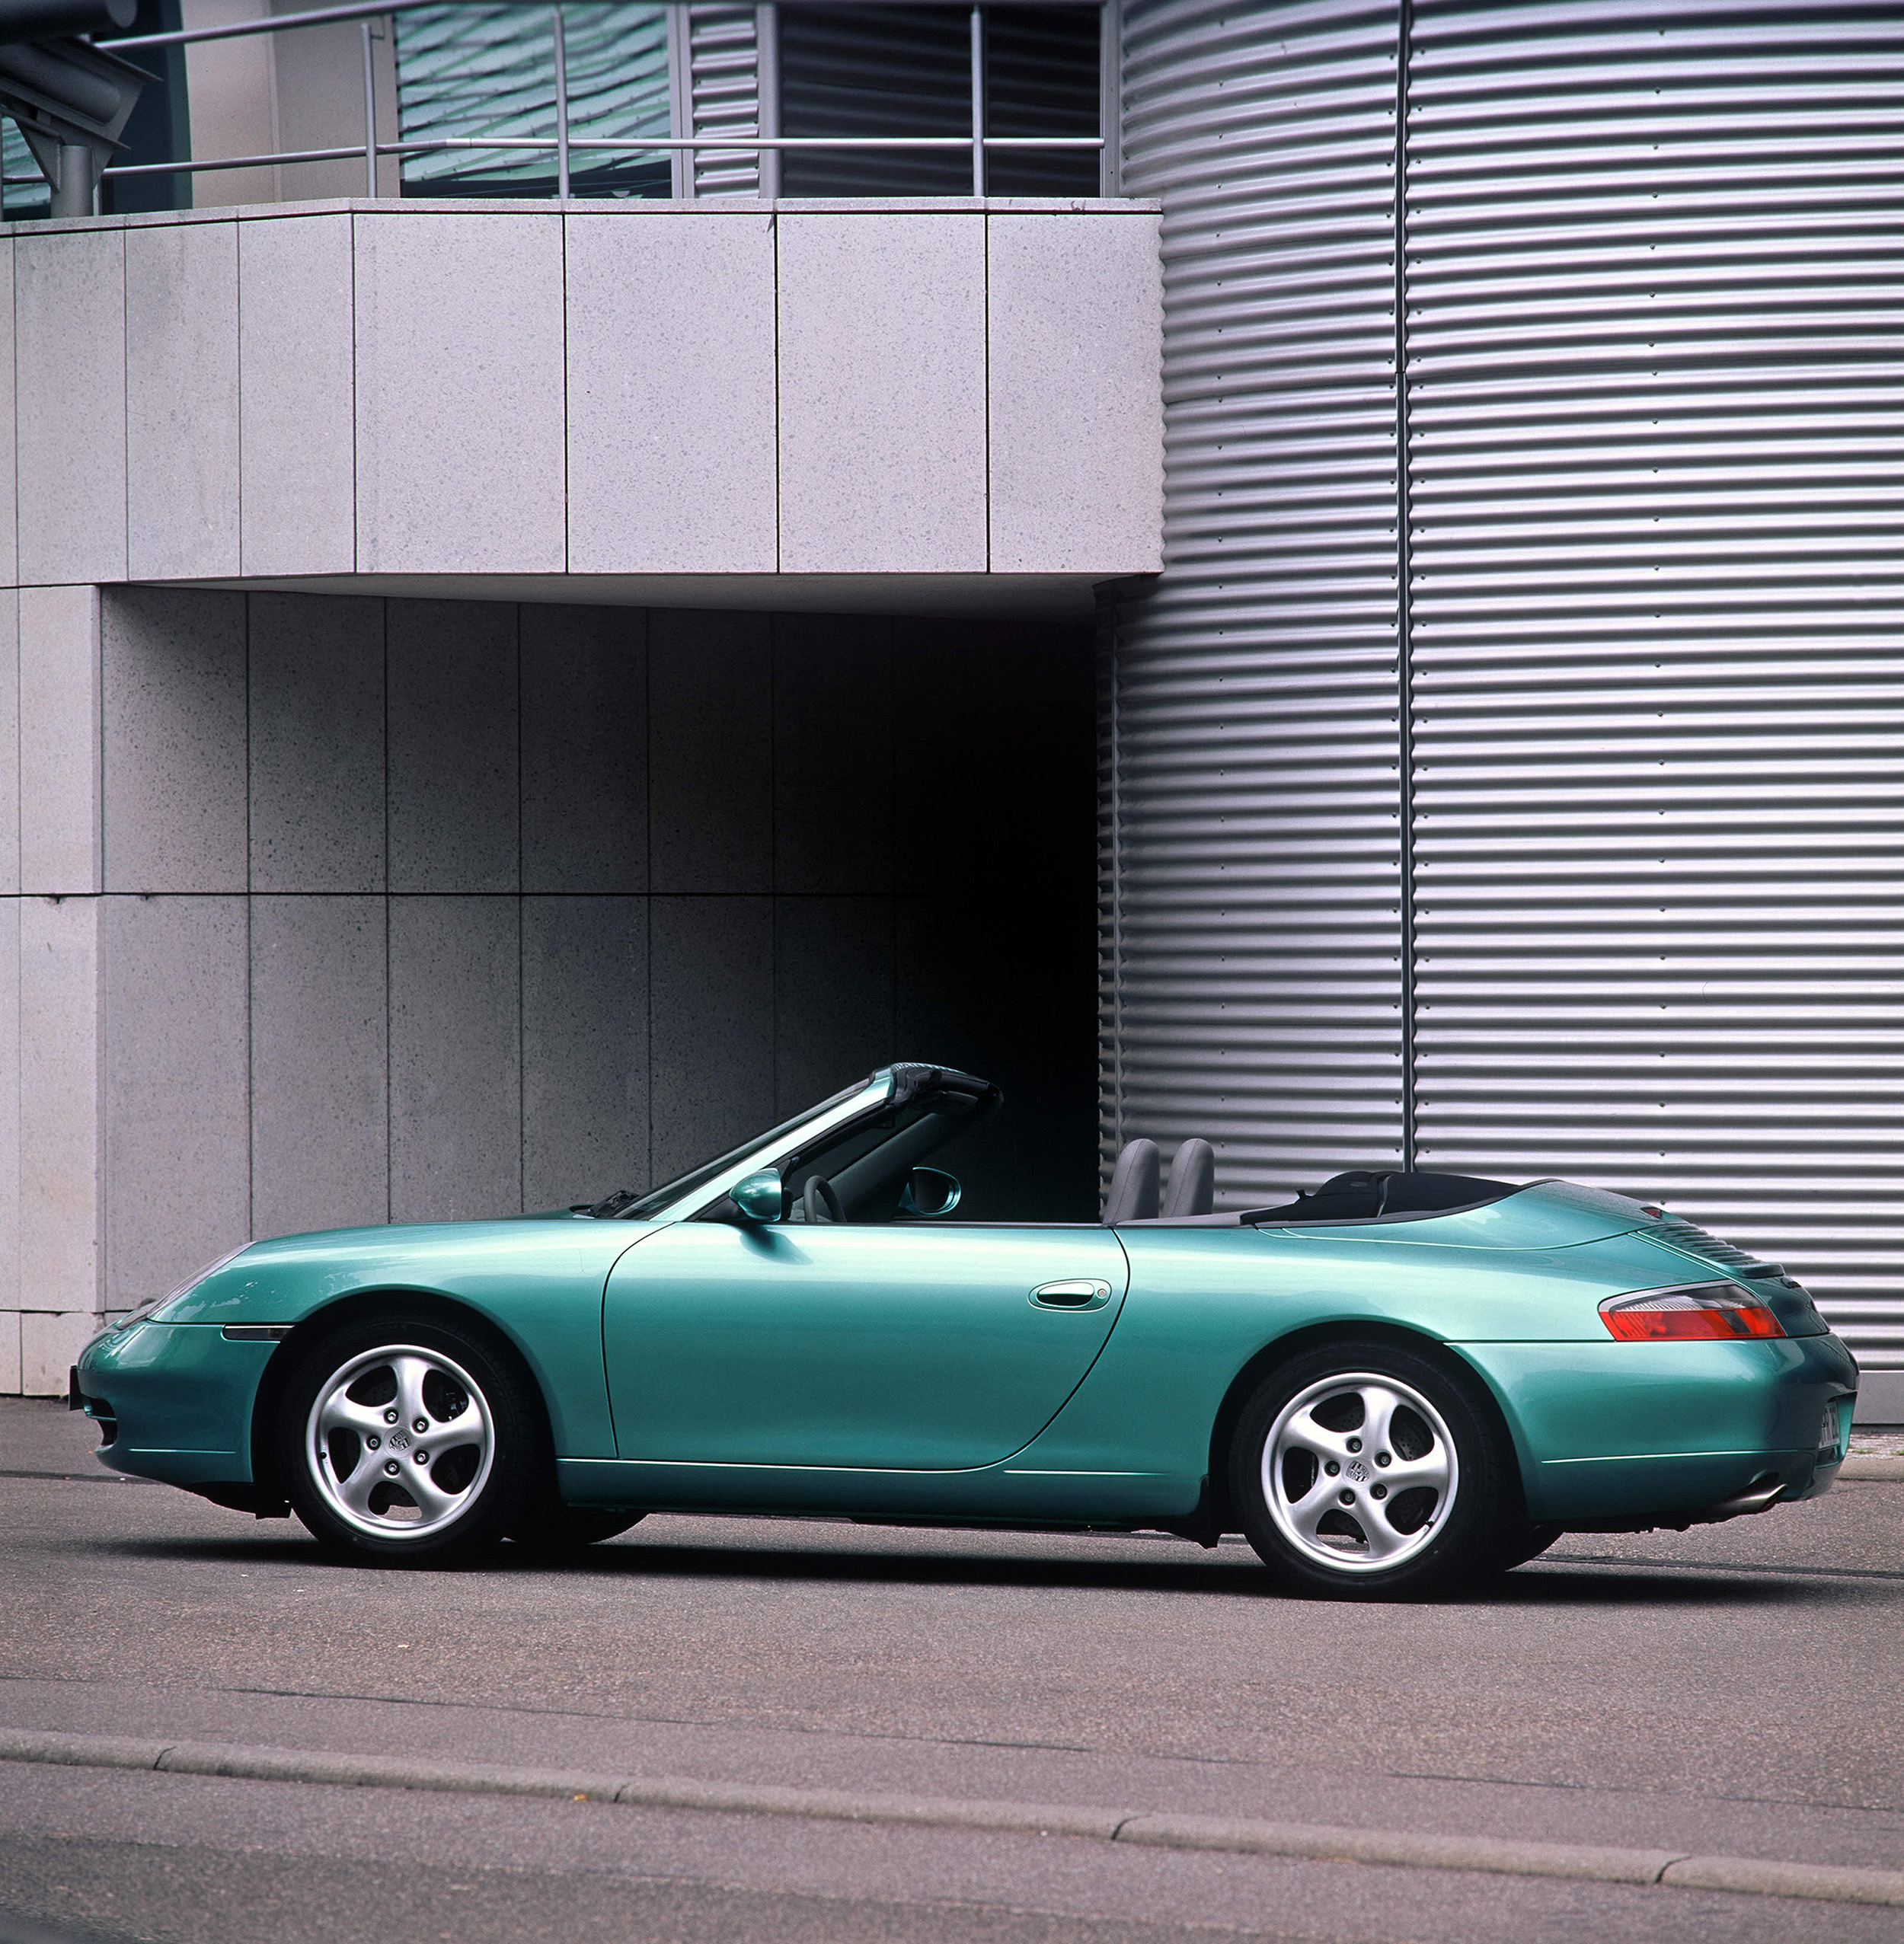 1997: The 996 with water cooling - Production anniversary of the